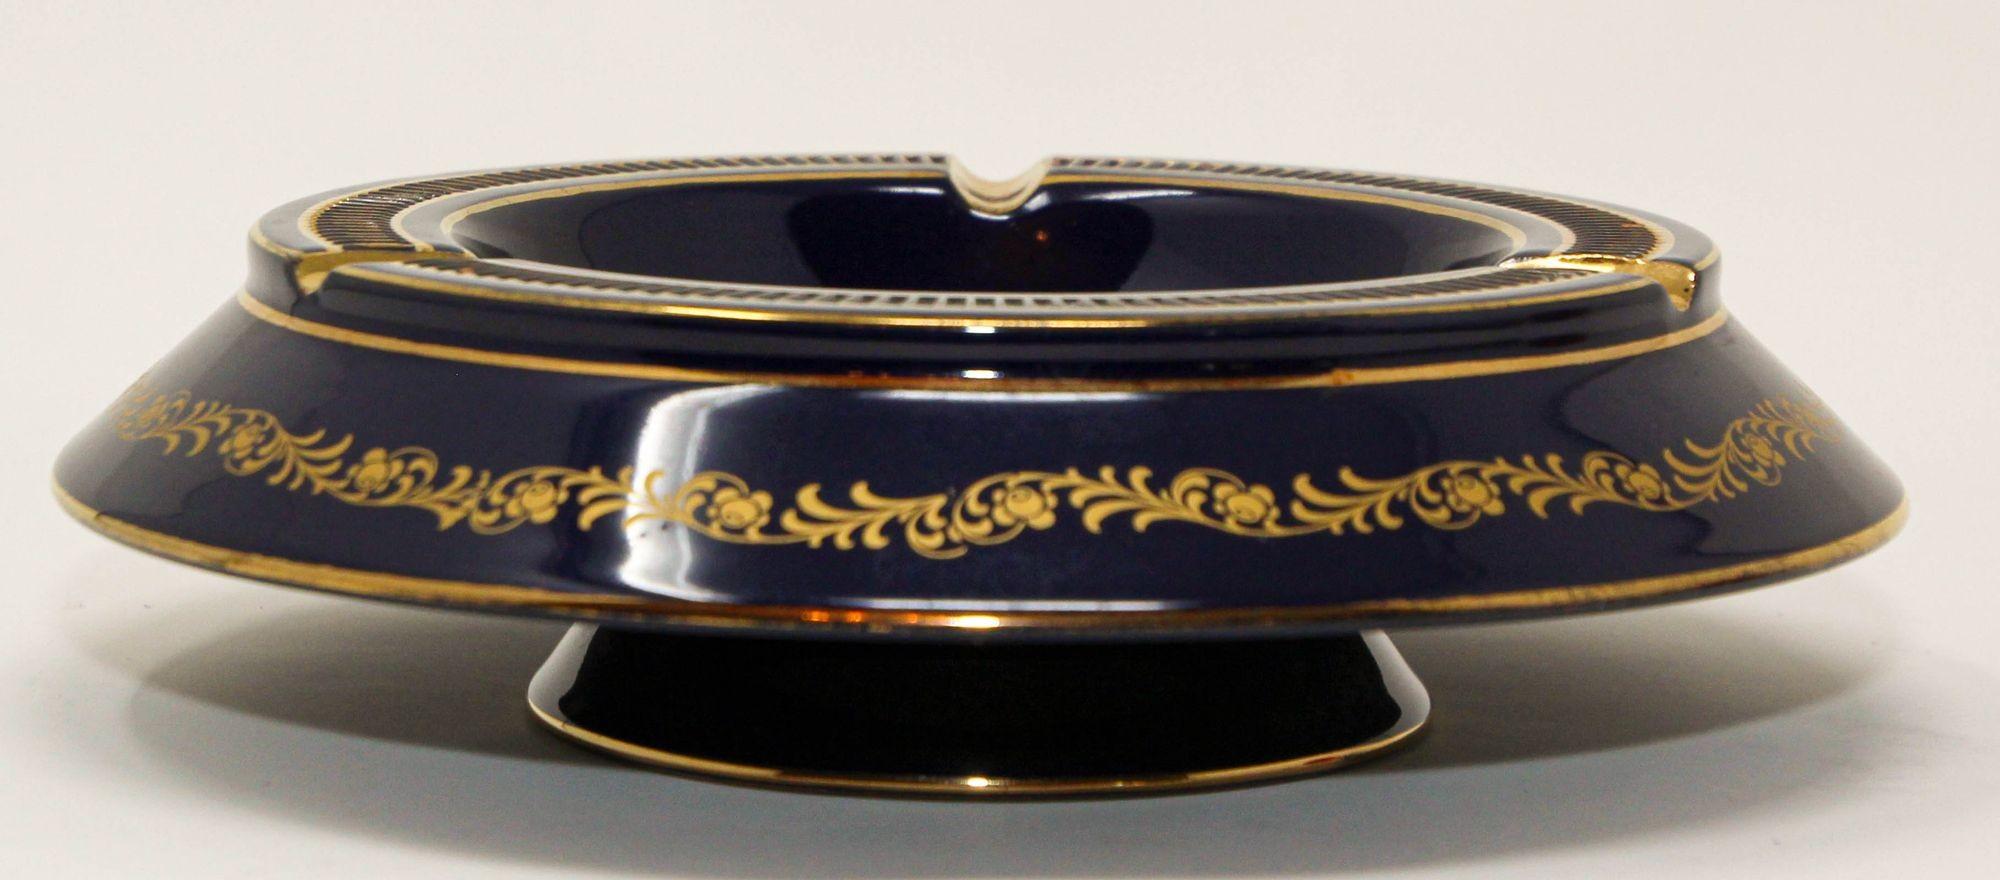 Hand painted gilded cobalt blue KBNY Ashtray Capodimonte Italy.
Vintage Limoges, Sevres style porcelain ashtray in cobalt royal blue with fine gold decor.
Beautiful Collectible royal blue porcelain ash tray handcrafted and hand painted with